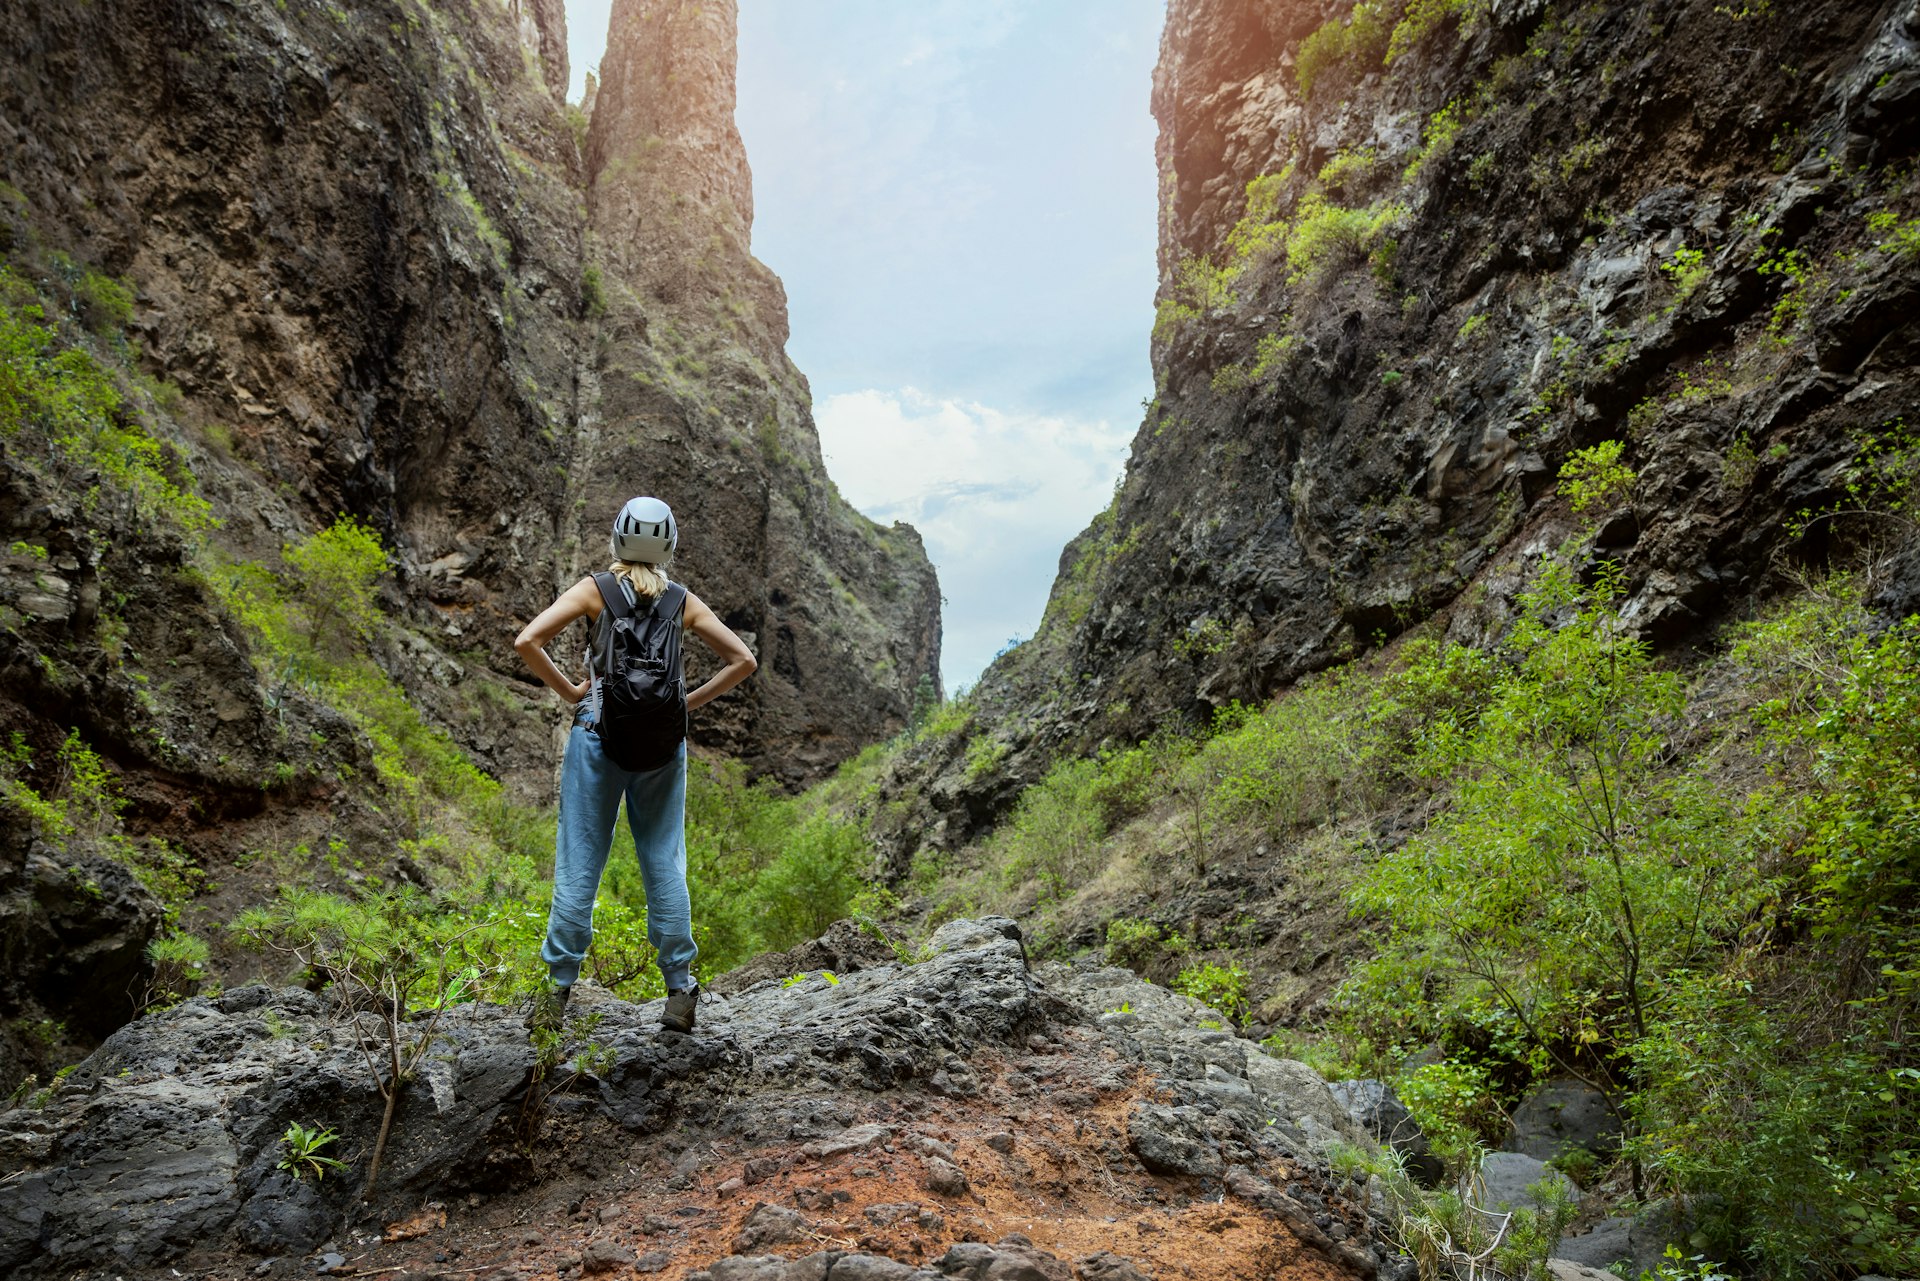 A woman wearing a helmet stands on a trail in the Barranco del Infierno, a sheer-sided rocky canyon in Tenerife. Canary Islands